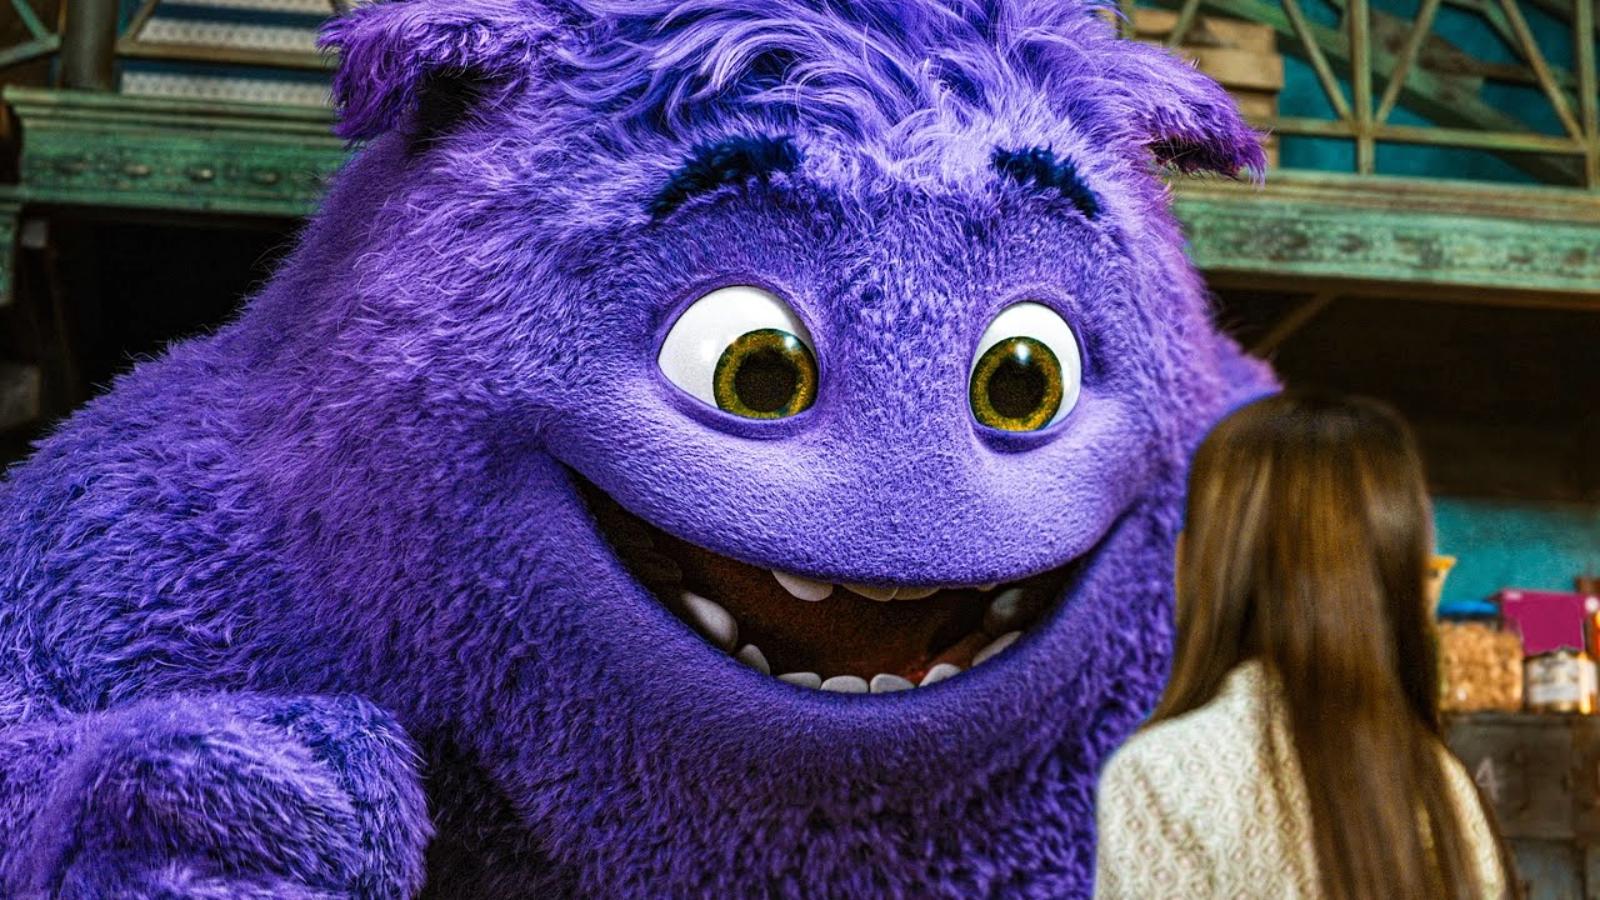 Steve Carrell as Blue, a large purple furry creature in IF